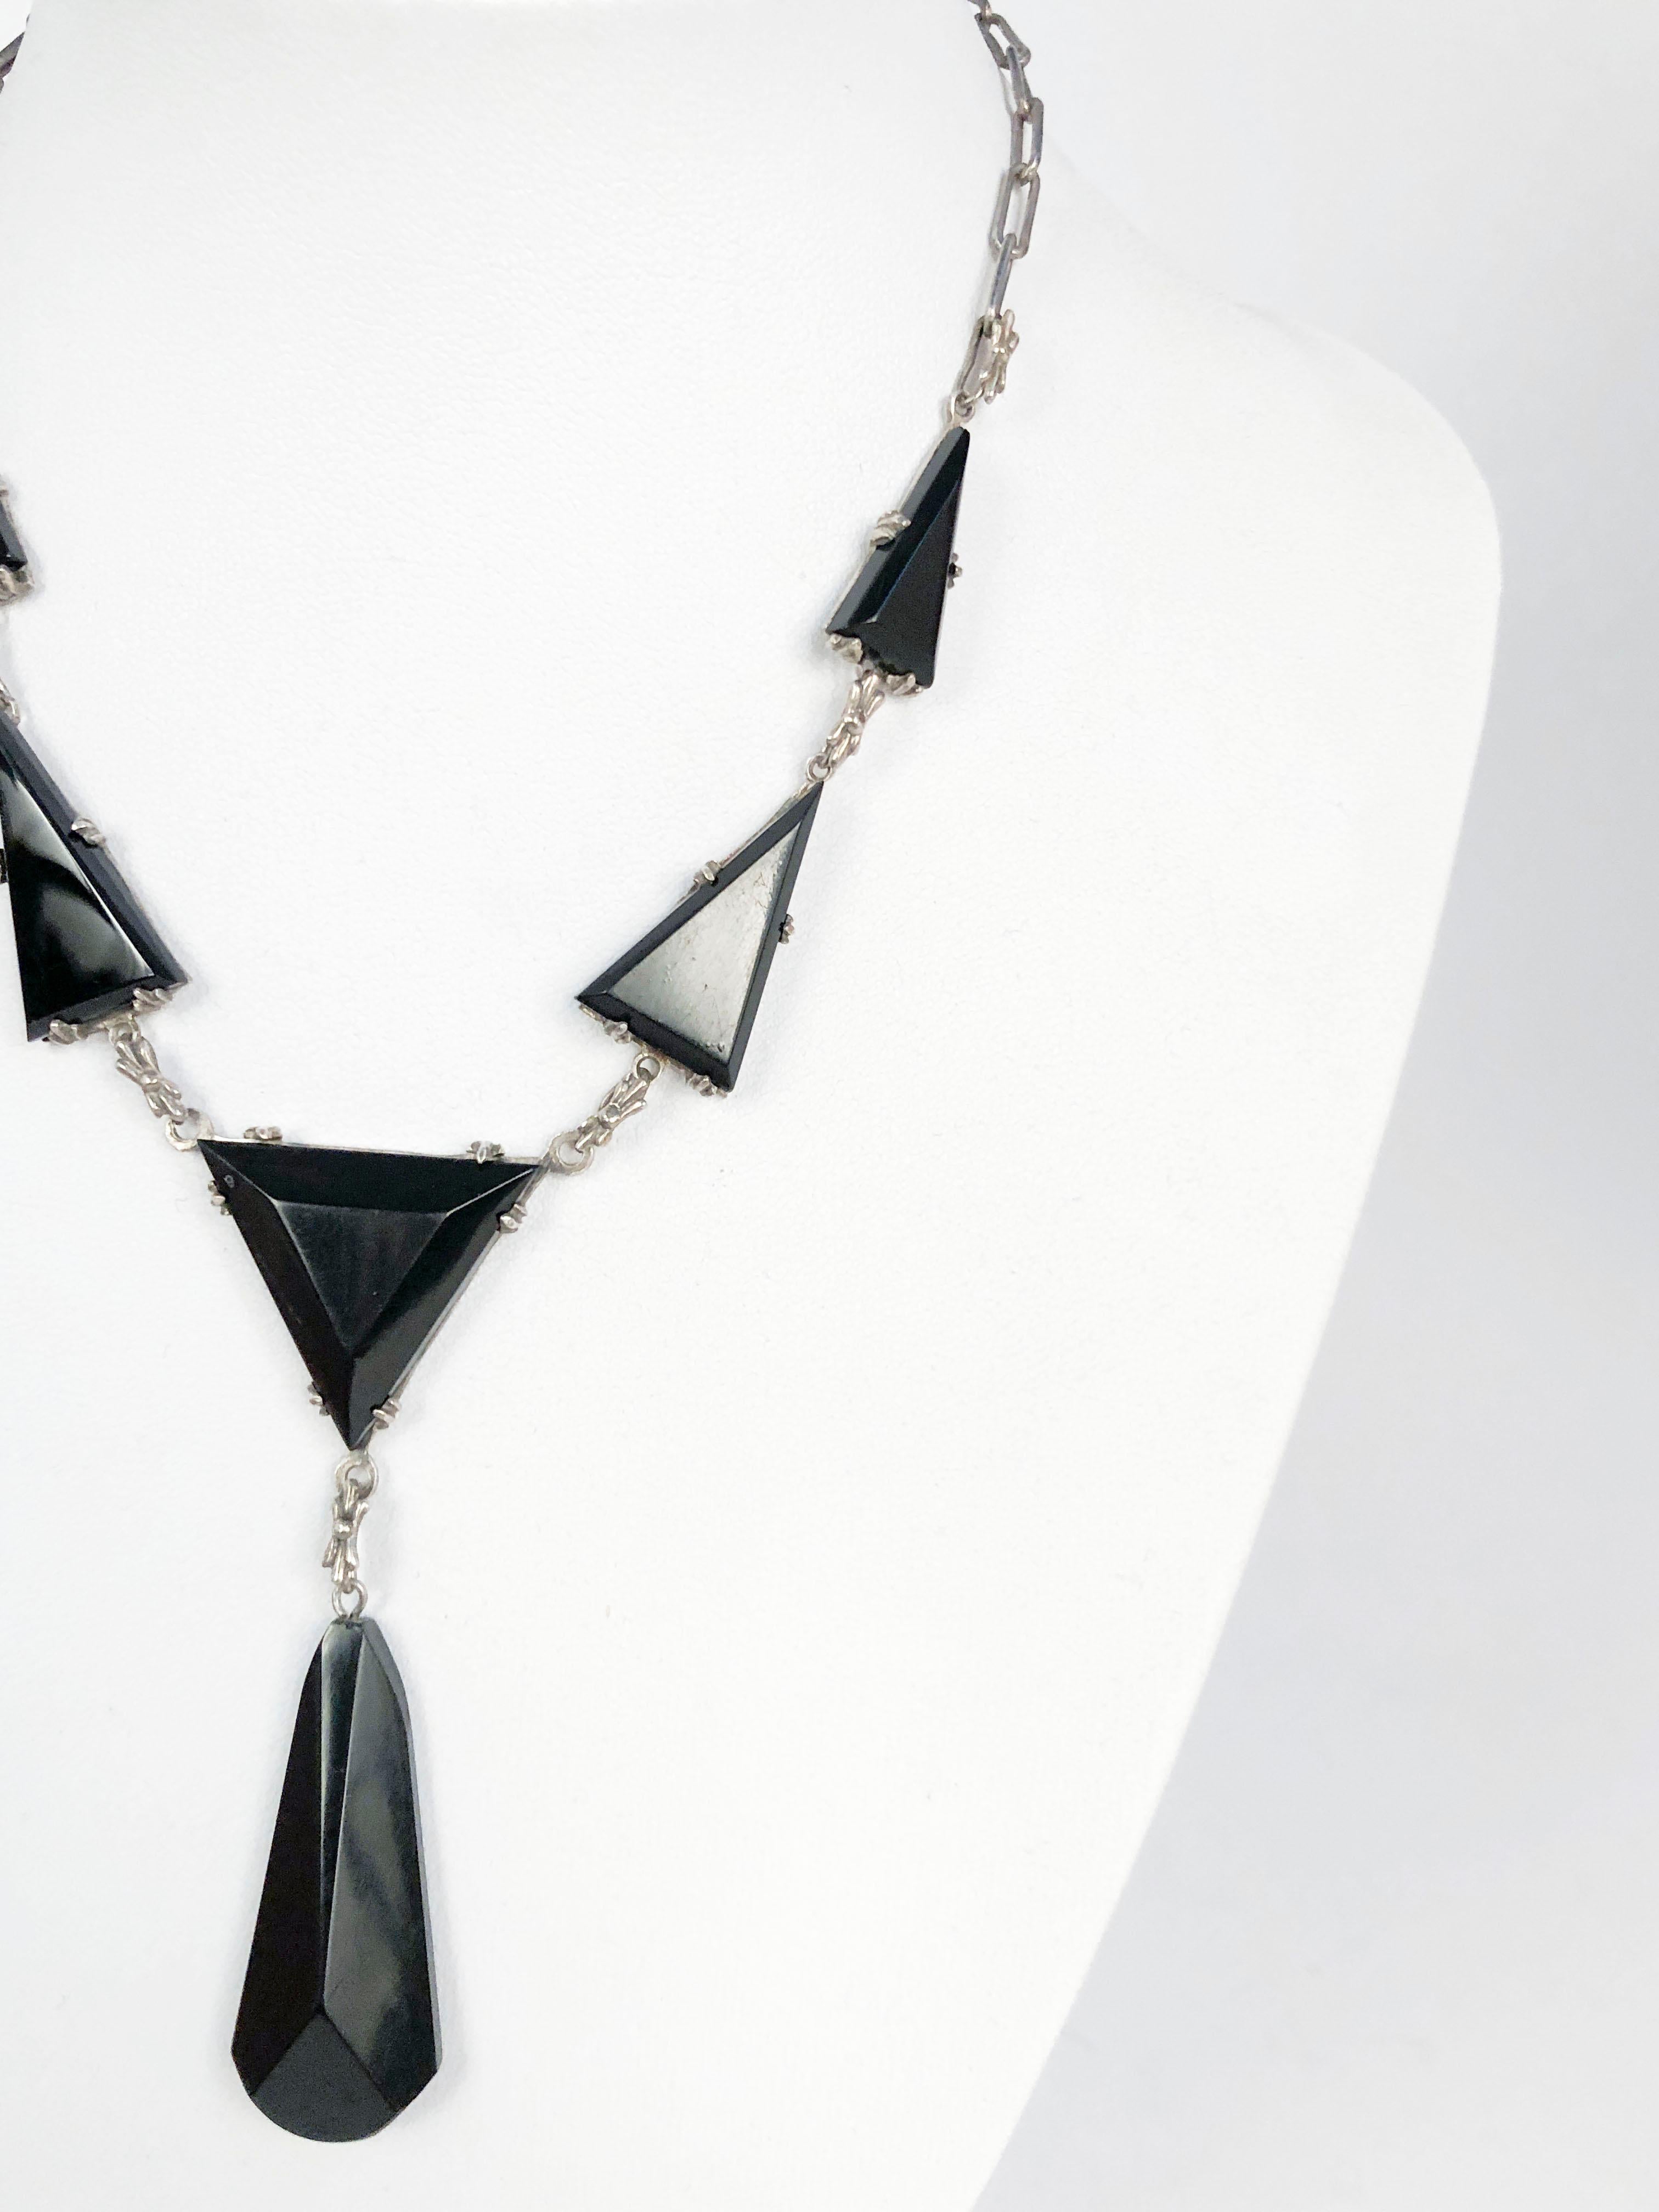 Women's 1930s Deco Onyx, Bakelite, and Silver Necklace